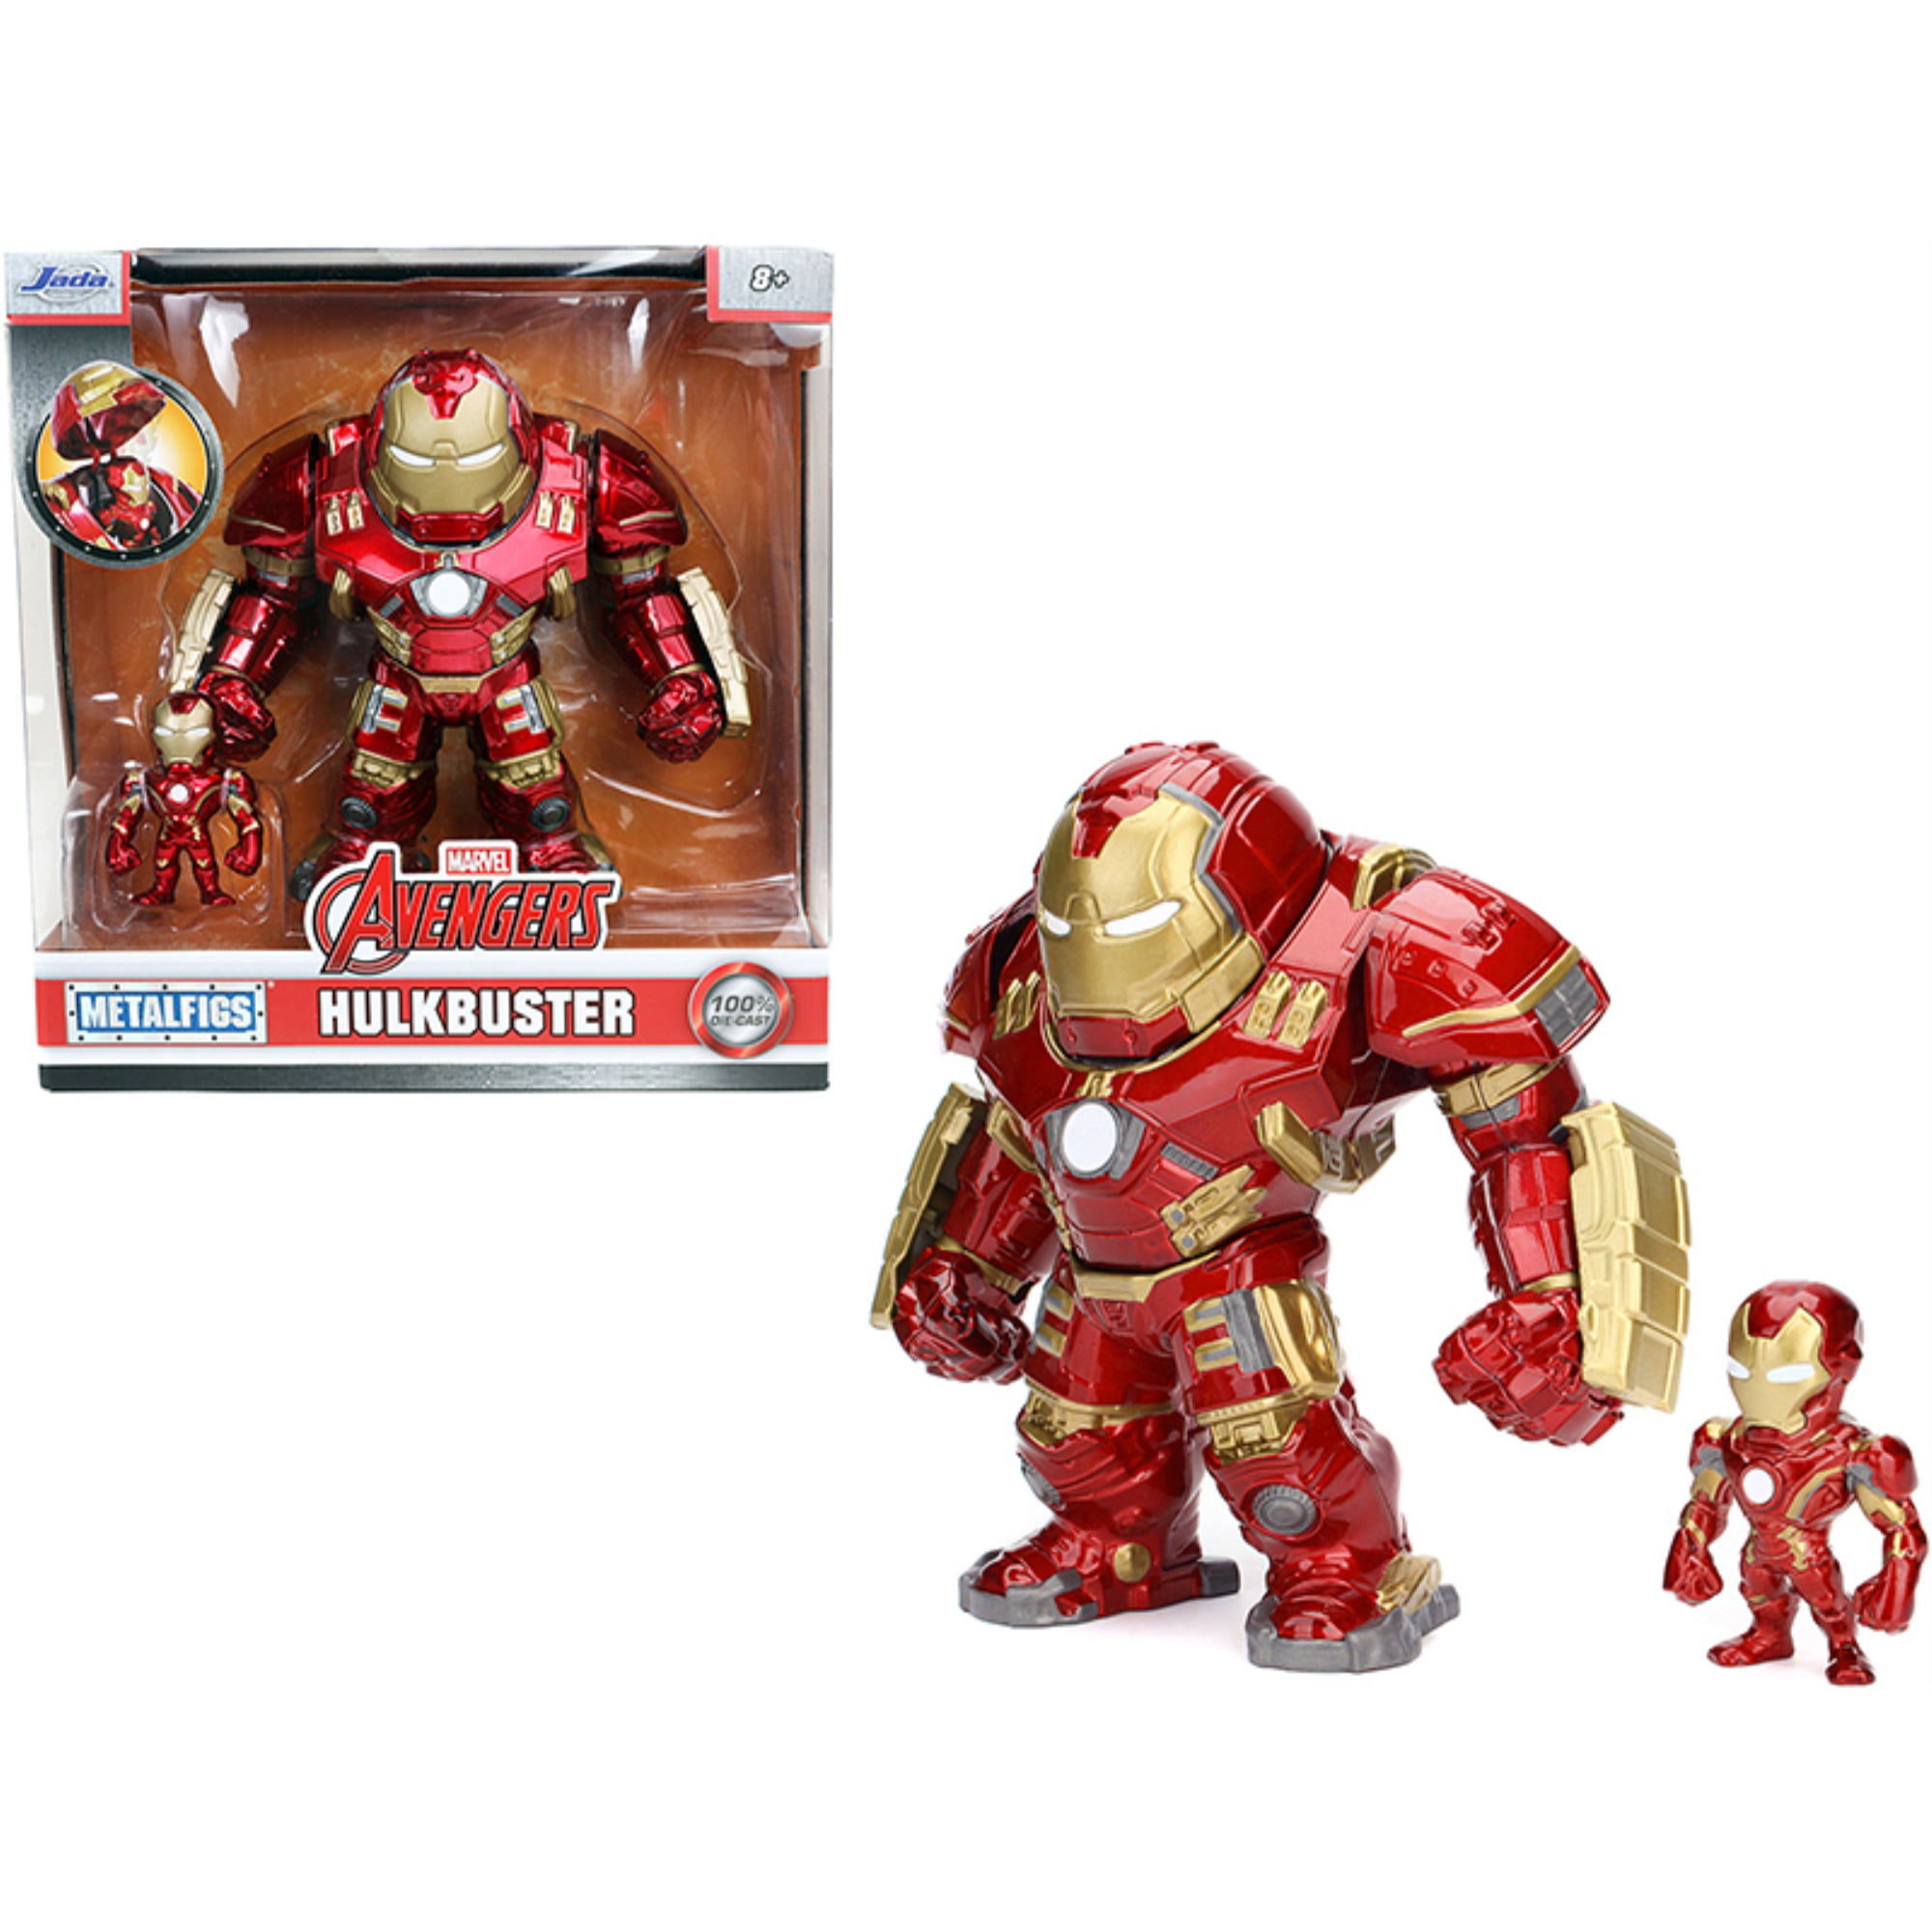 Marvel Avengers Hulkbuster and Iron Man Diecast Metal Collectible Figurines 